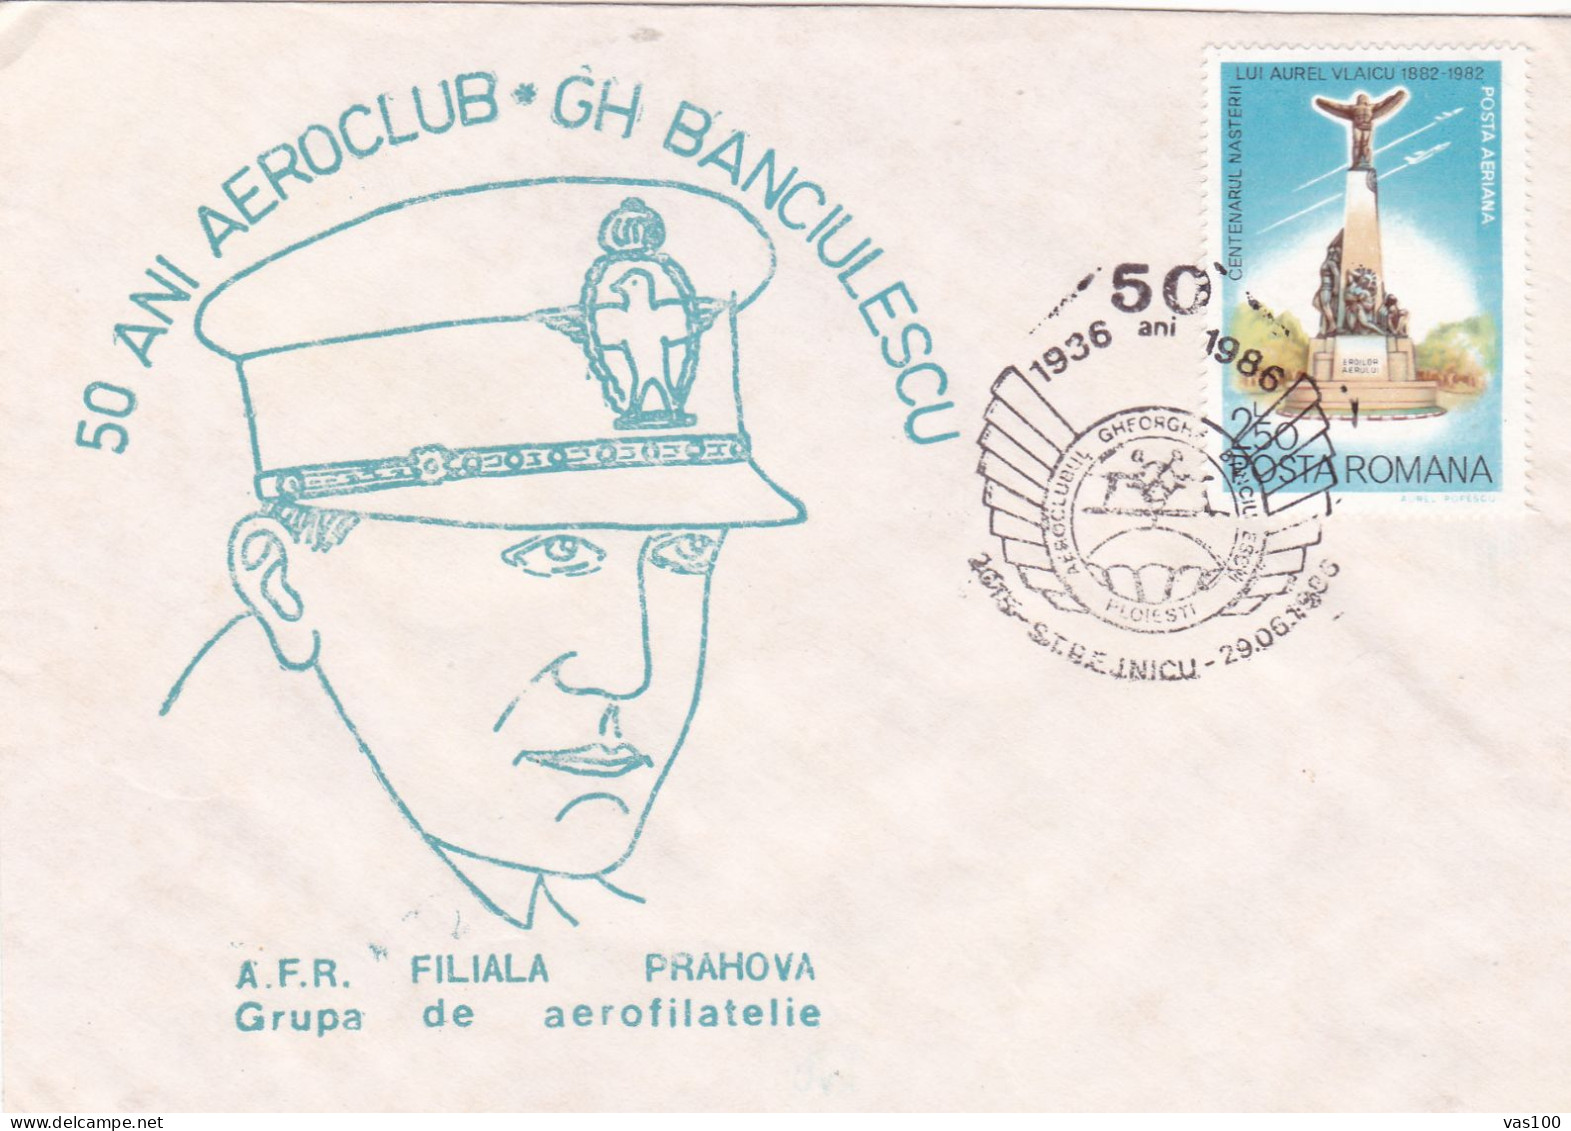 AVIATION CAPTAIN GH BANCIULESCU COVERS   STATIONERY 1986 ROMANIA - Lettres & Documents